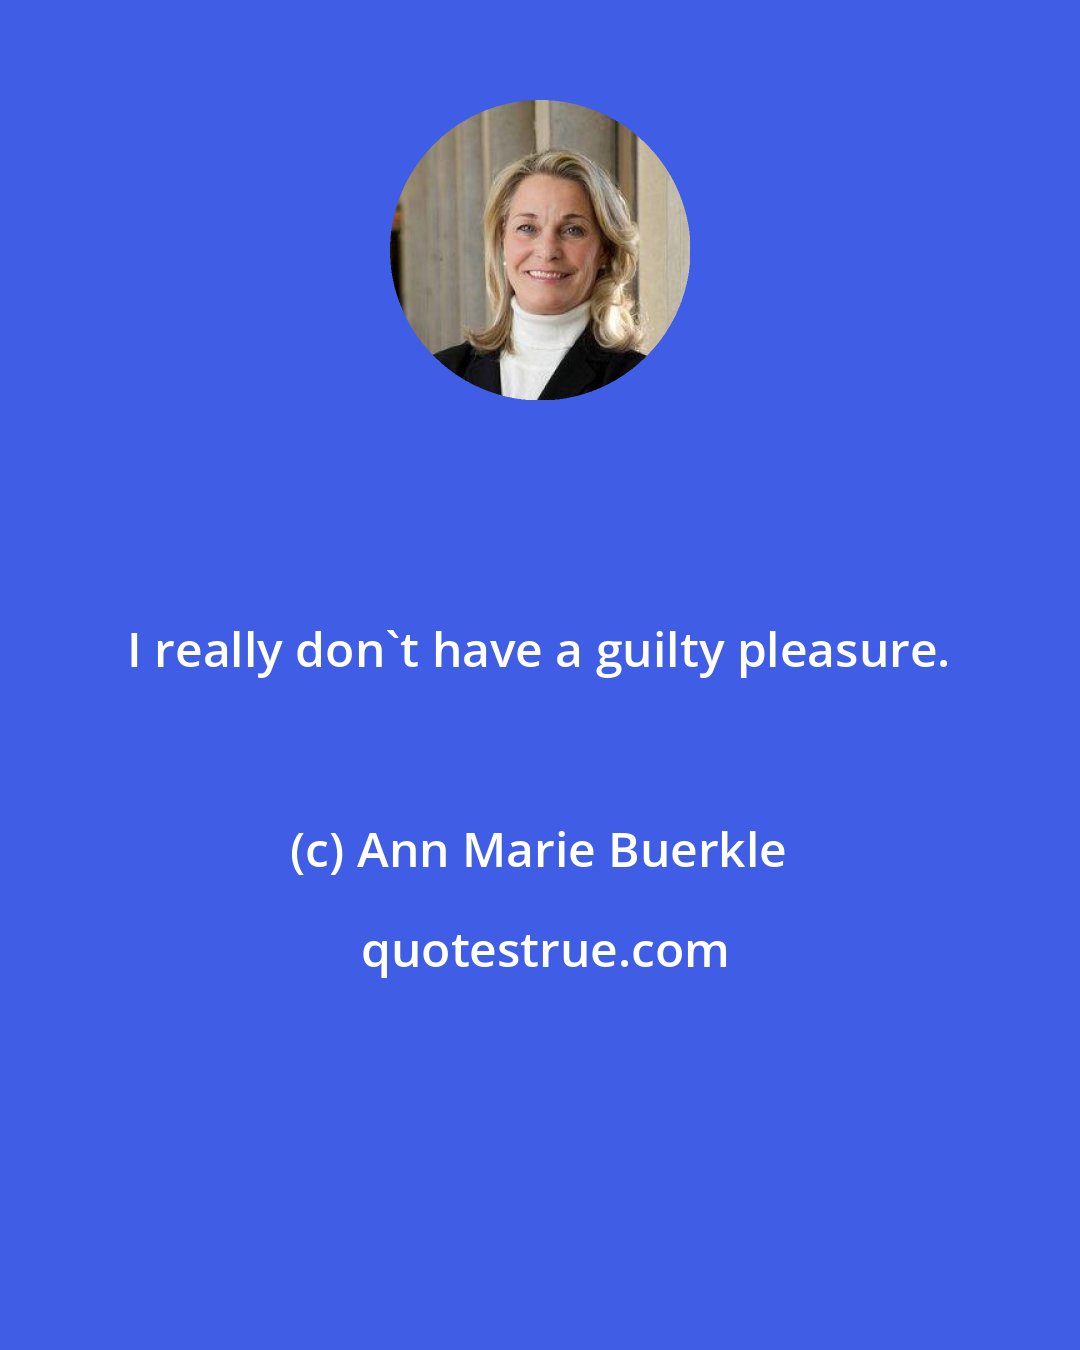 Ann Marie Buerkle: I really don't have a guilty pleasure.